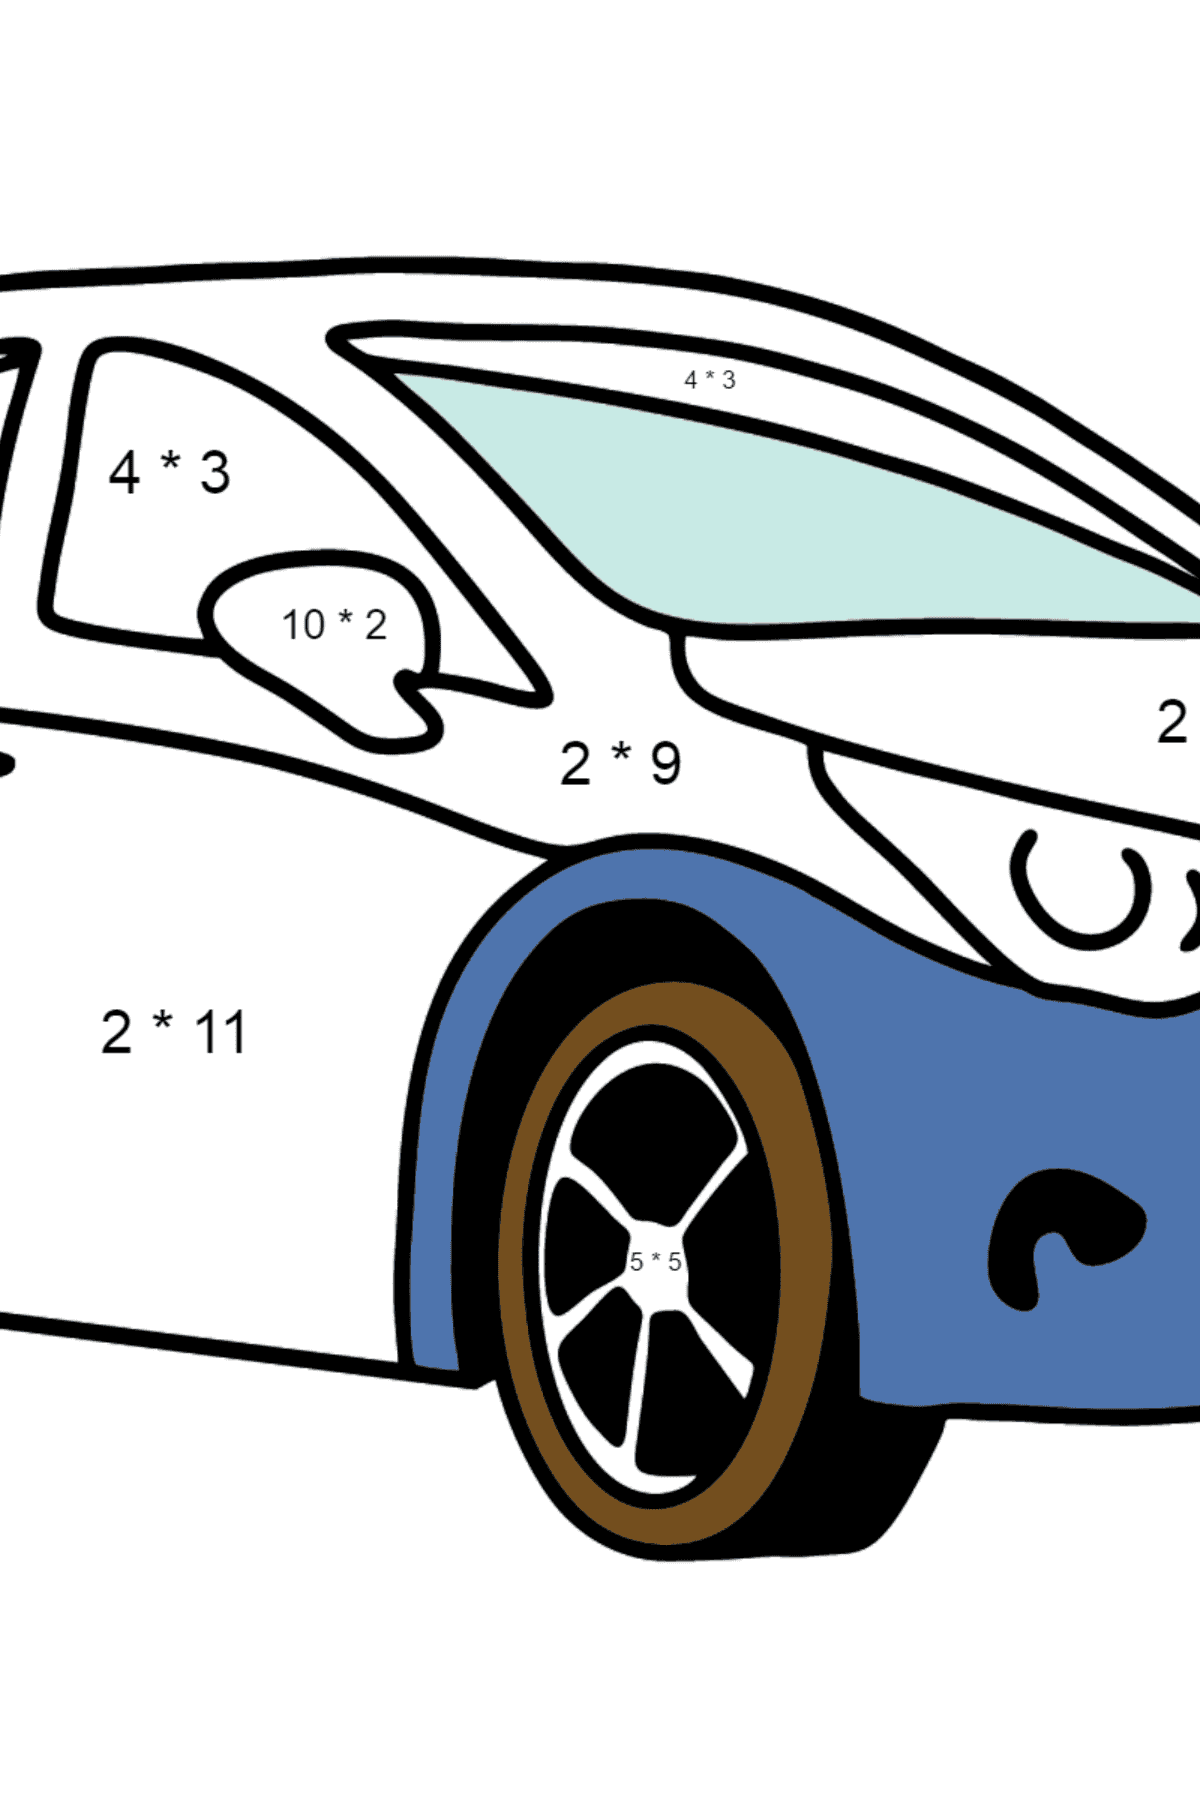 Toyota Avensis Car coloring page - Math Coloring - Multiplication for Kids